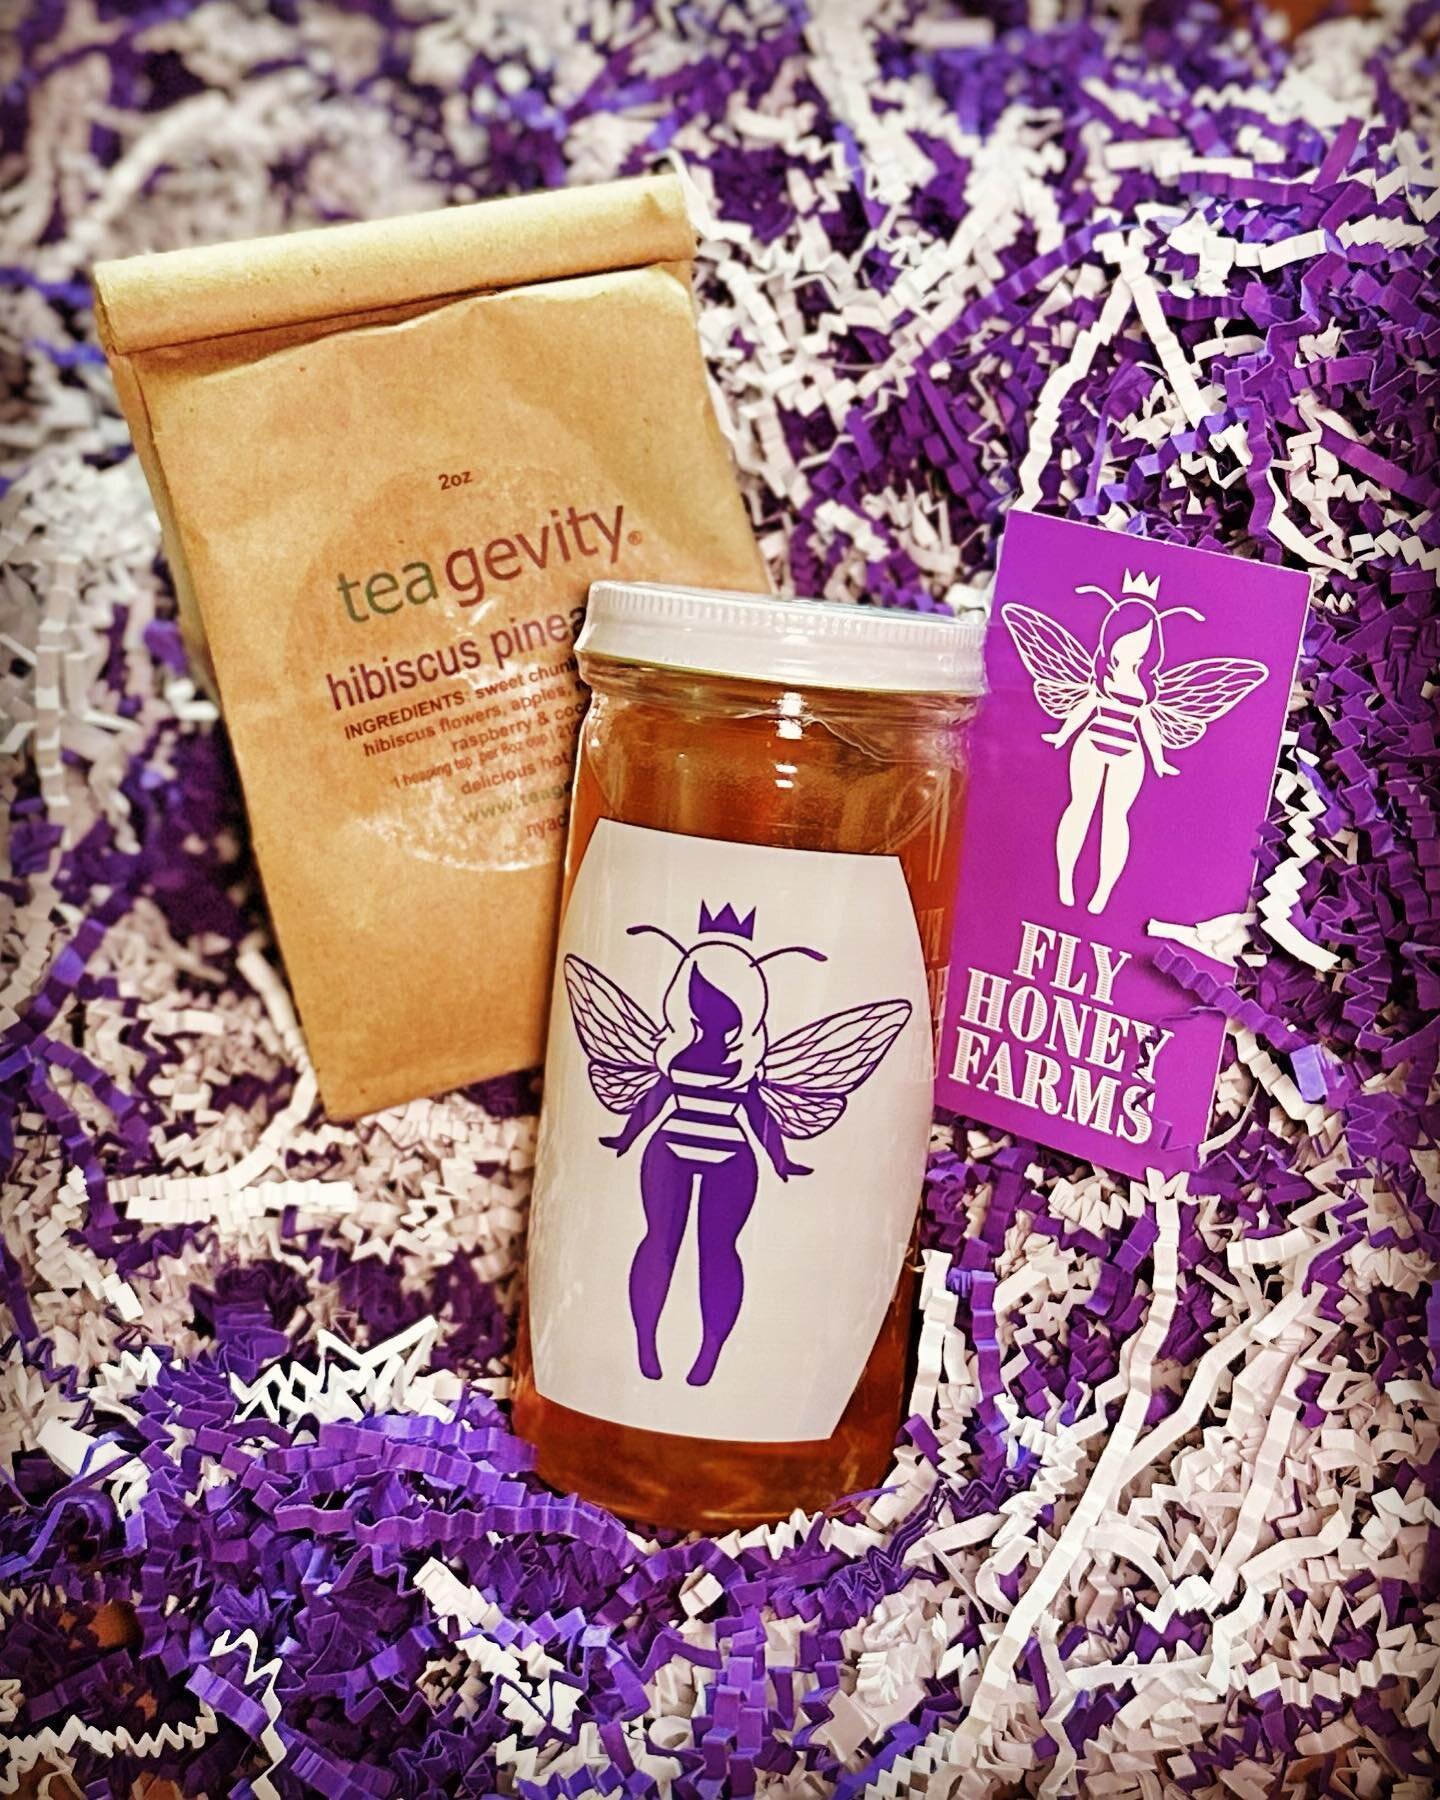 MAJOR KEY&hellip; Honey &amp; Tea! Its that simple. 
One of our upcoming / refreshed Holiday offerings! Proud to partner with another local maven in the family over at @teagevity out of Rockland. We collab RIGHT. See ya&rsquo;ll when we throw these o